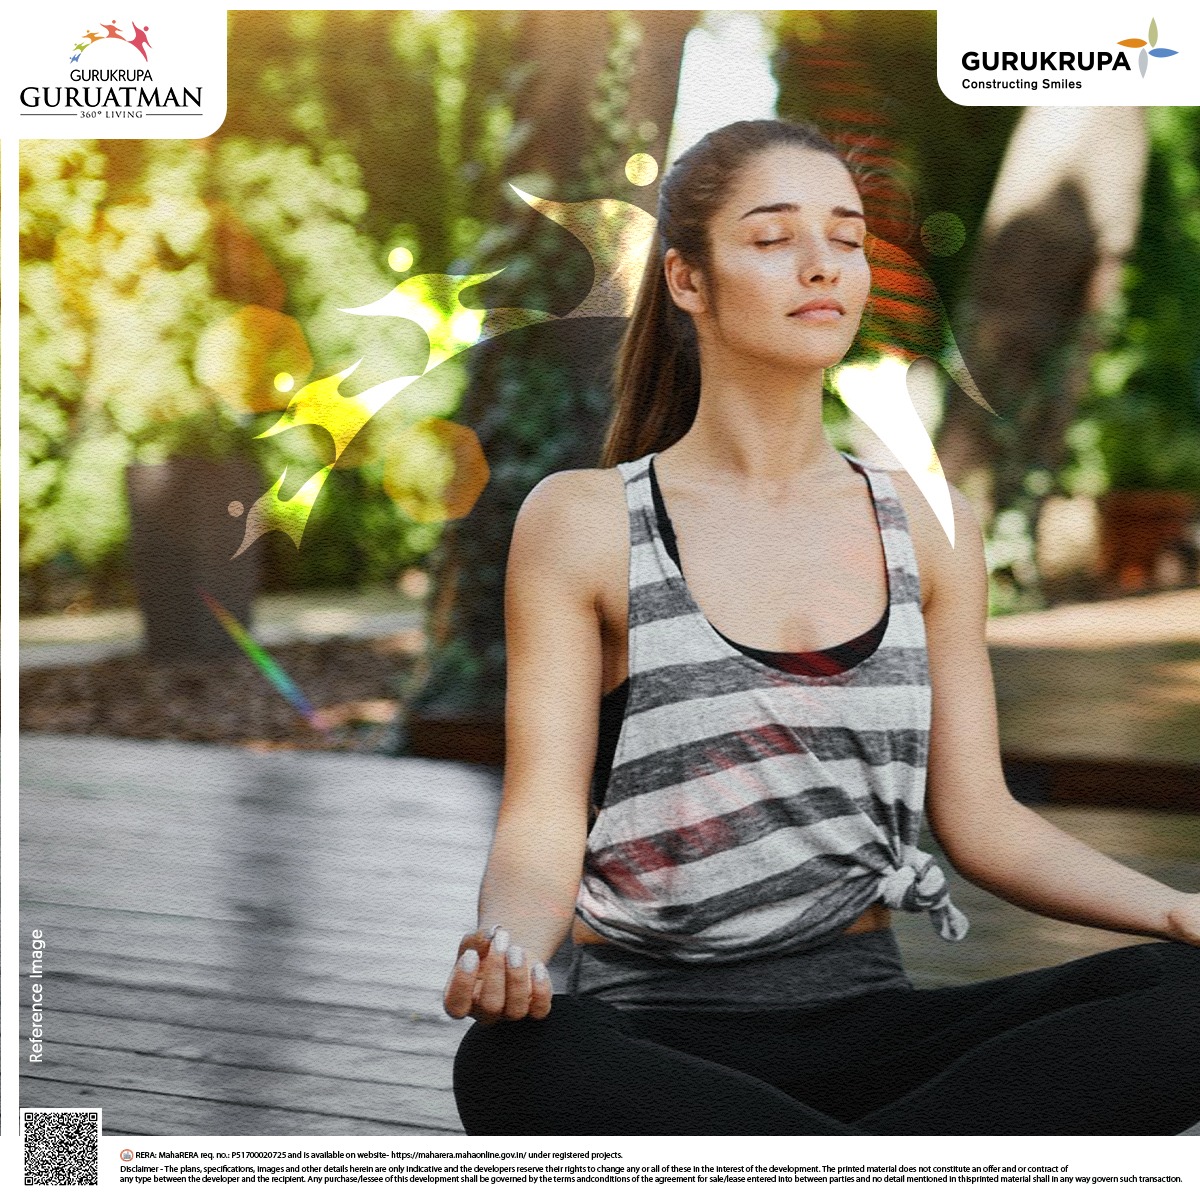 Your journey to self-discovery begins at Guru Atman. Explore homes that resonate with your soul.

#GuruAtmanLiving #SoulfulHomes #InnerHarmony #LuxuryRealEstate #HolisticLiving #SelfDiscoveryJourney #HomeIsWhereTheSoulIs #MindfulLiving #FindYourSanctuary #Kalyan